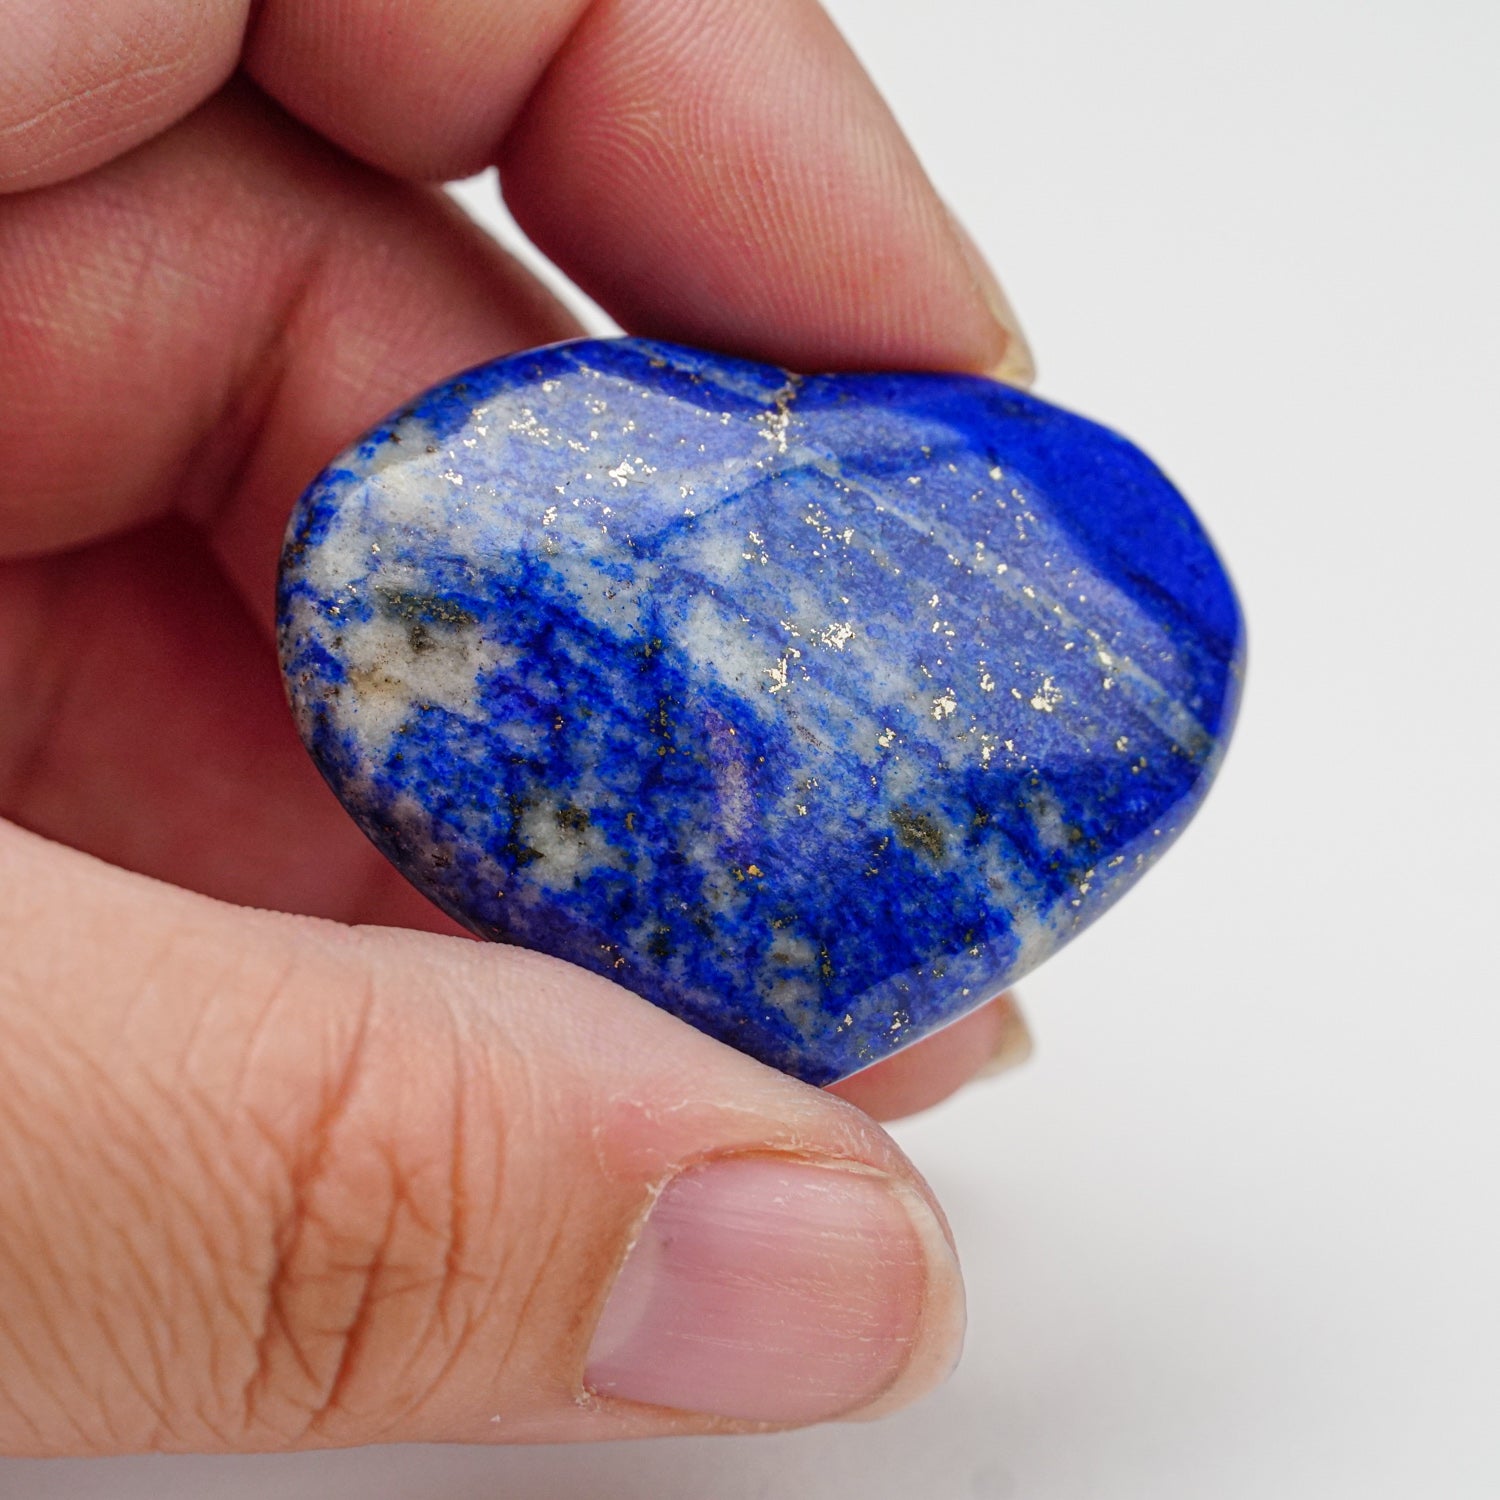 Polished Lapis Lazuli Heart from Afghanistan (25.9 grams)